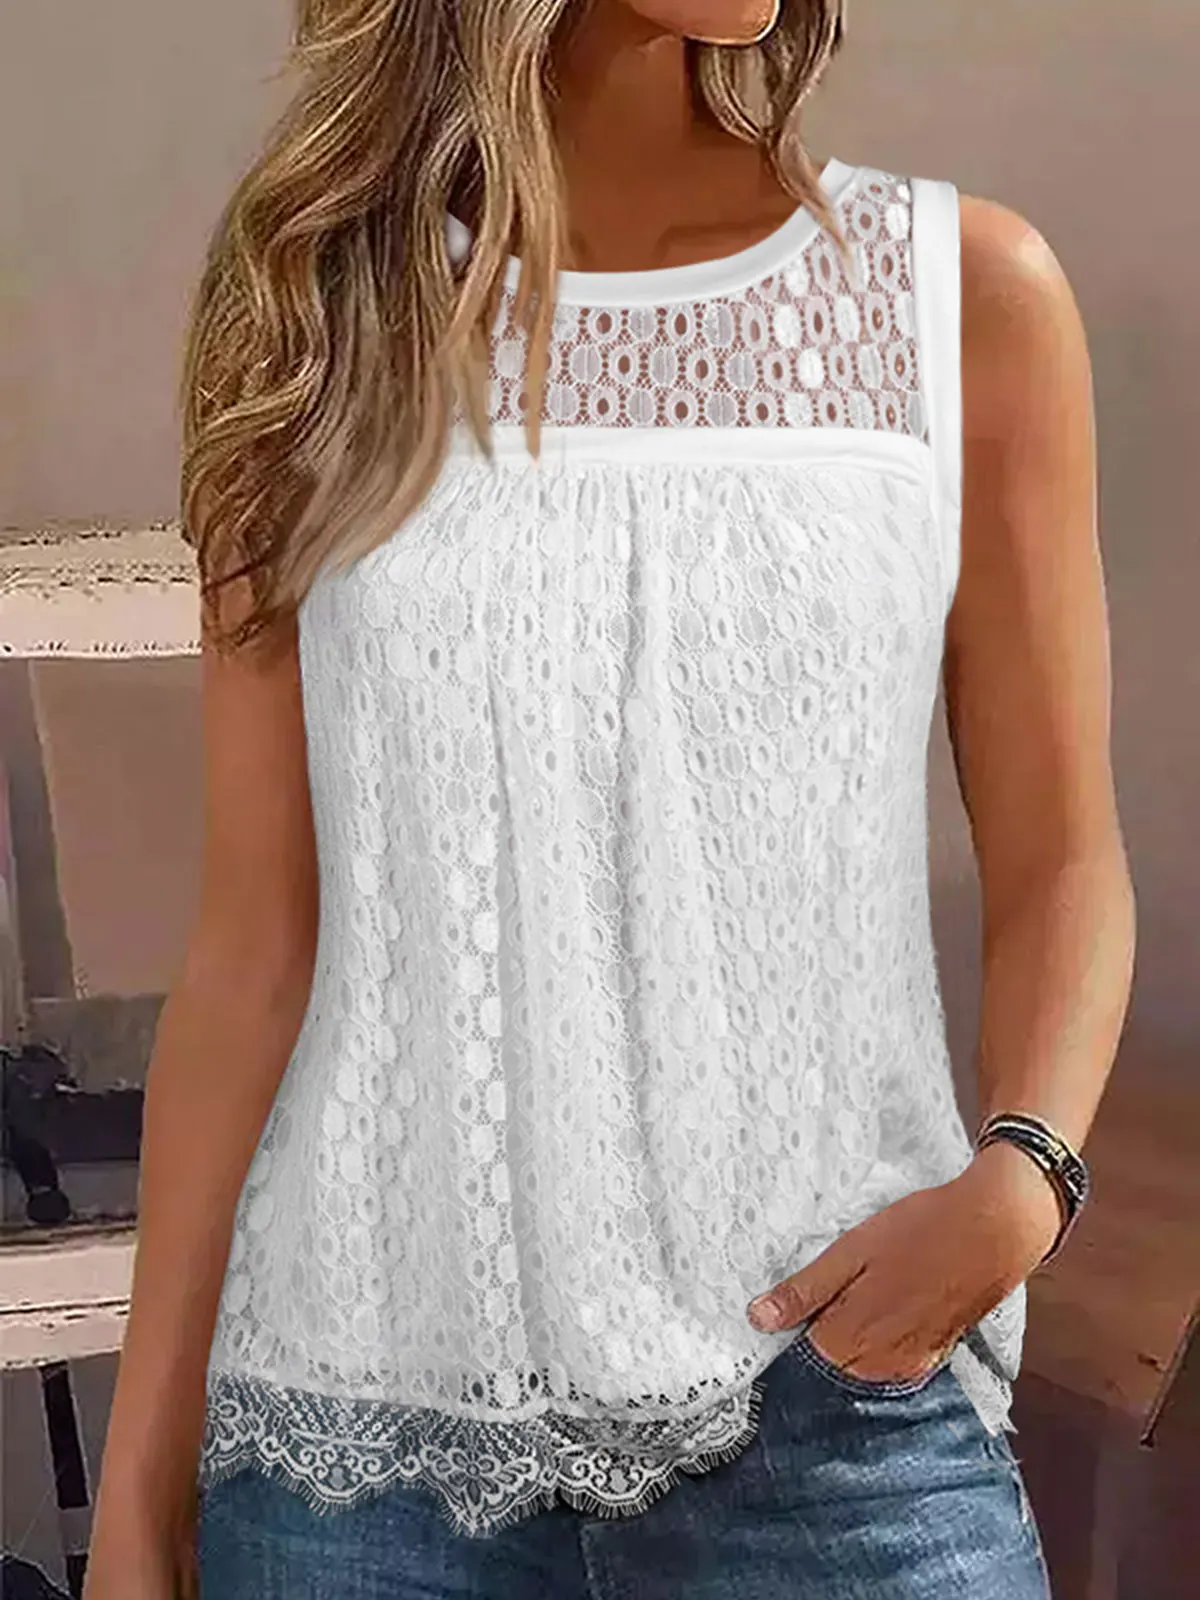 

Women O-Neck Lace Splicing Hollow Out Tank White Tank Top Pullover Tanks Loose Fit Summer Sleeveless Shirts Pleated Streetwear